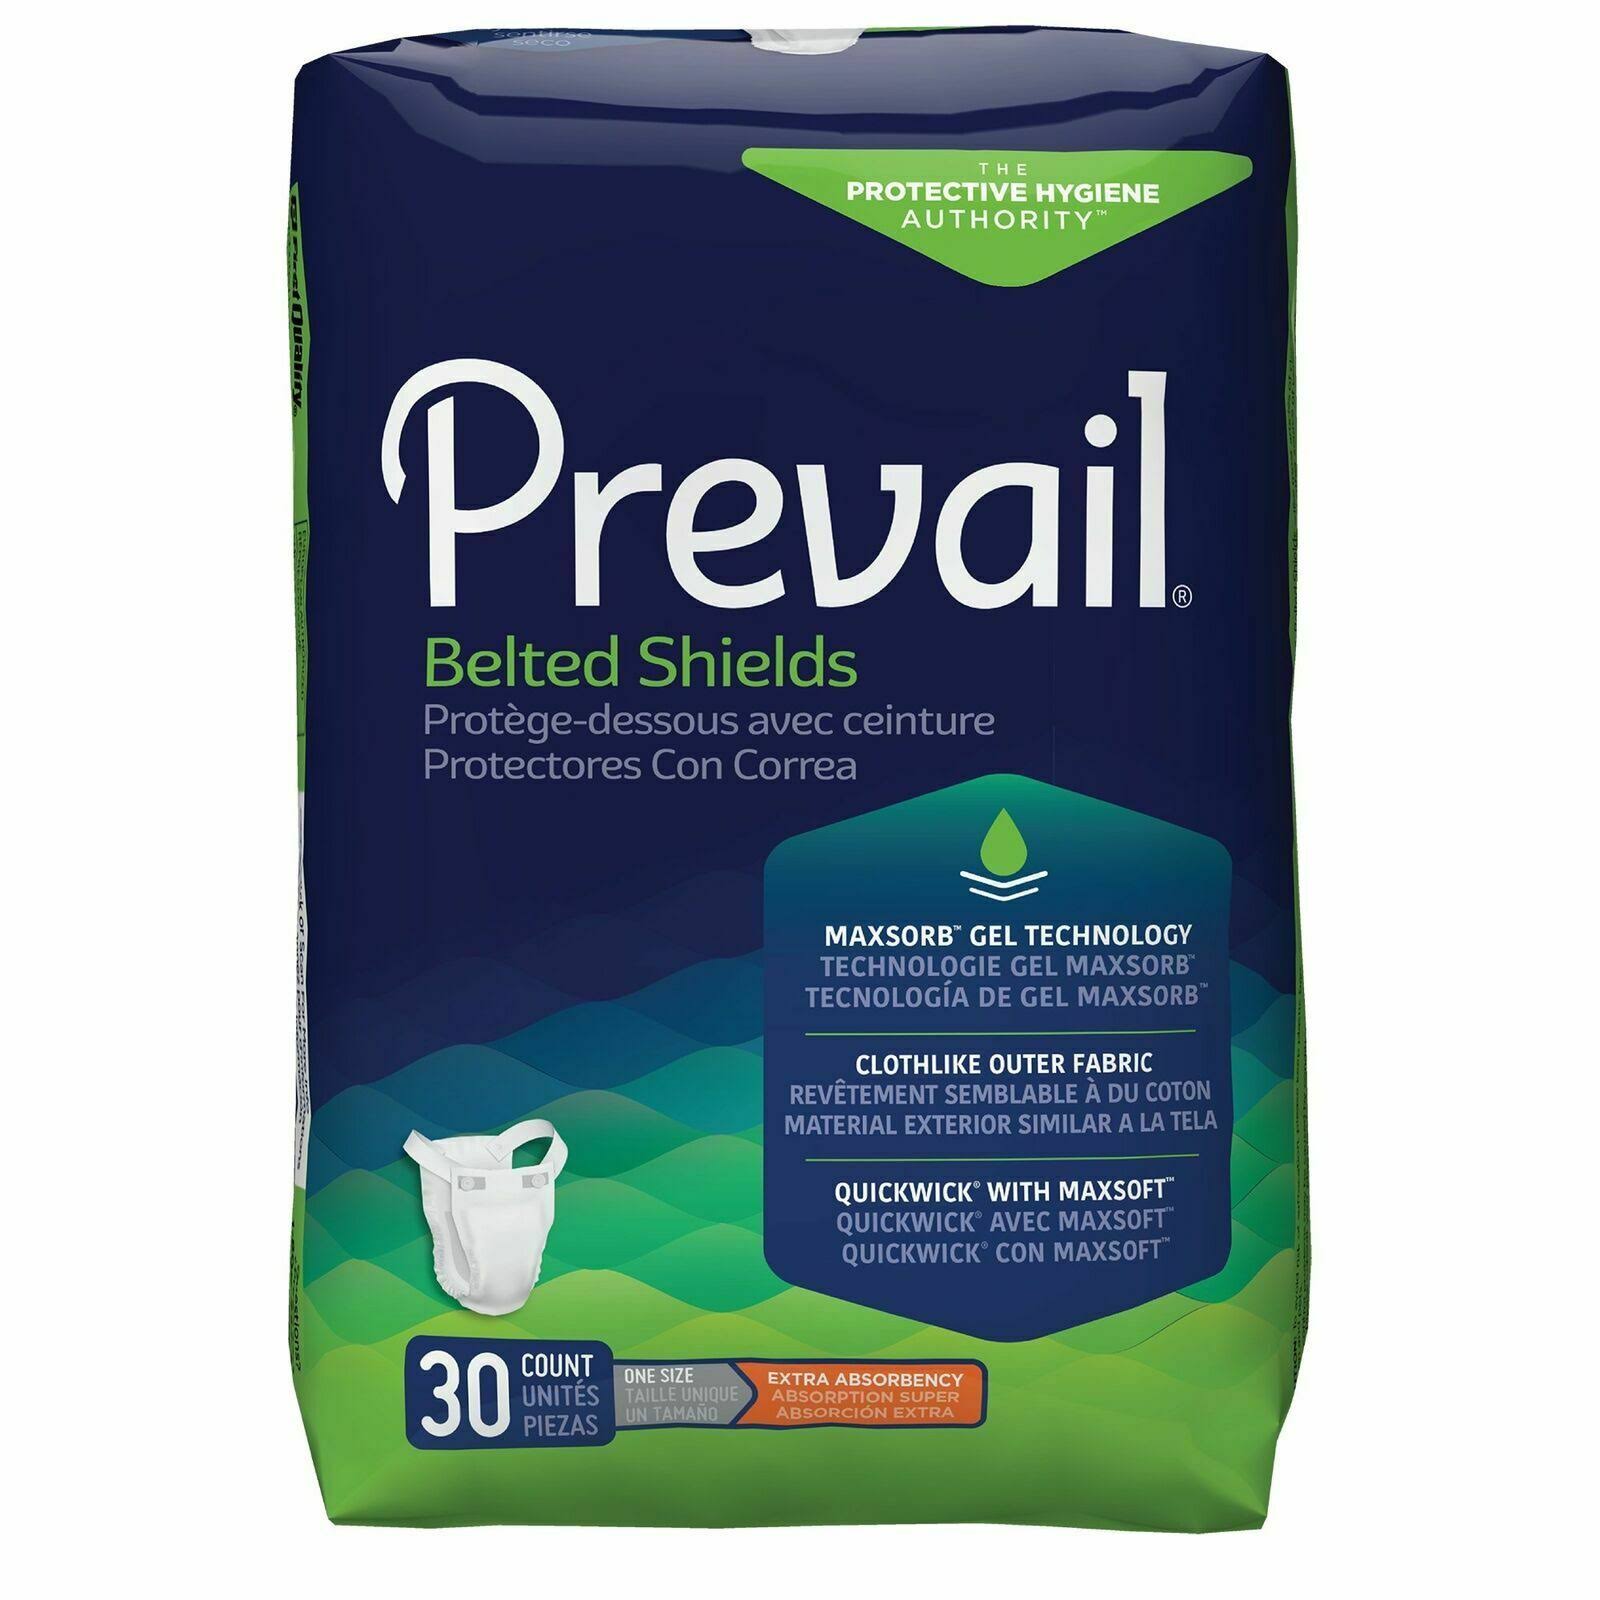 Prevail Belted Undergarments, White - 4 pack, 30 count each